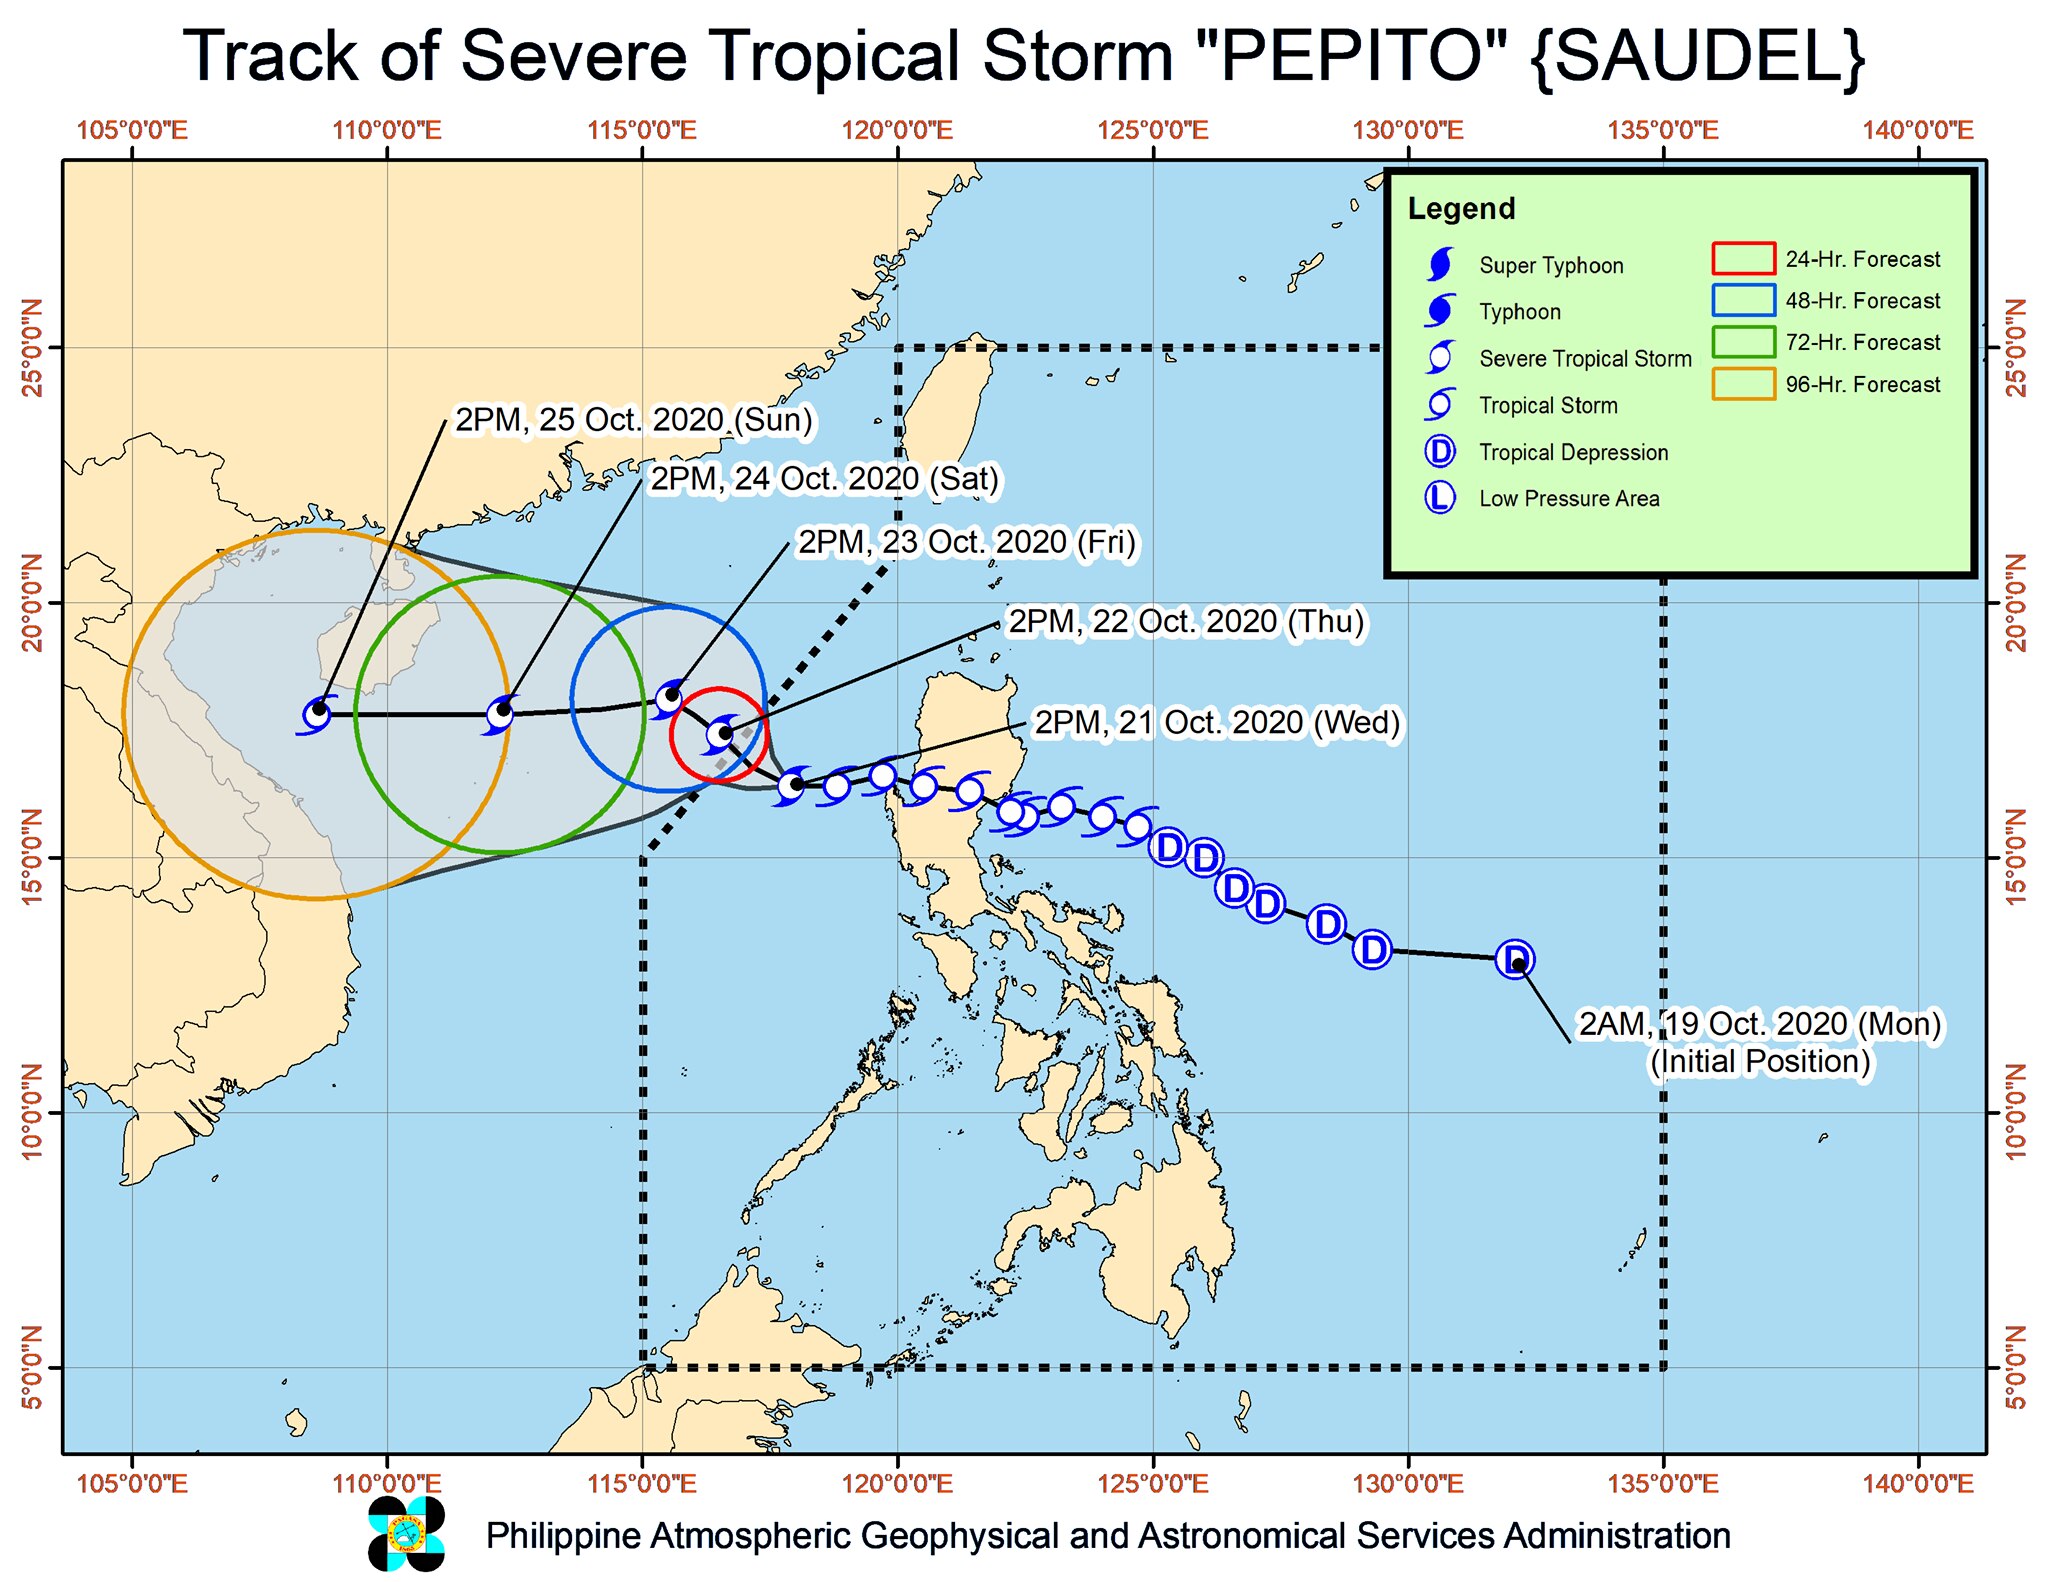 &#39;Pepito&#39; intensifies into severe tropical storm on way out of PH, all storm signals lifted 2